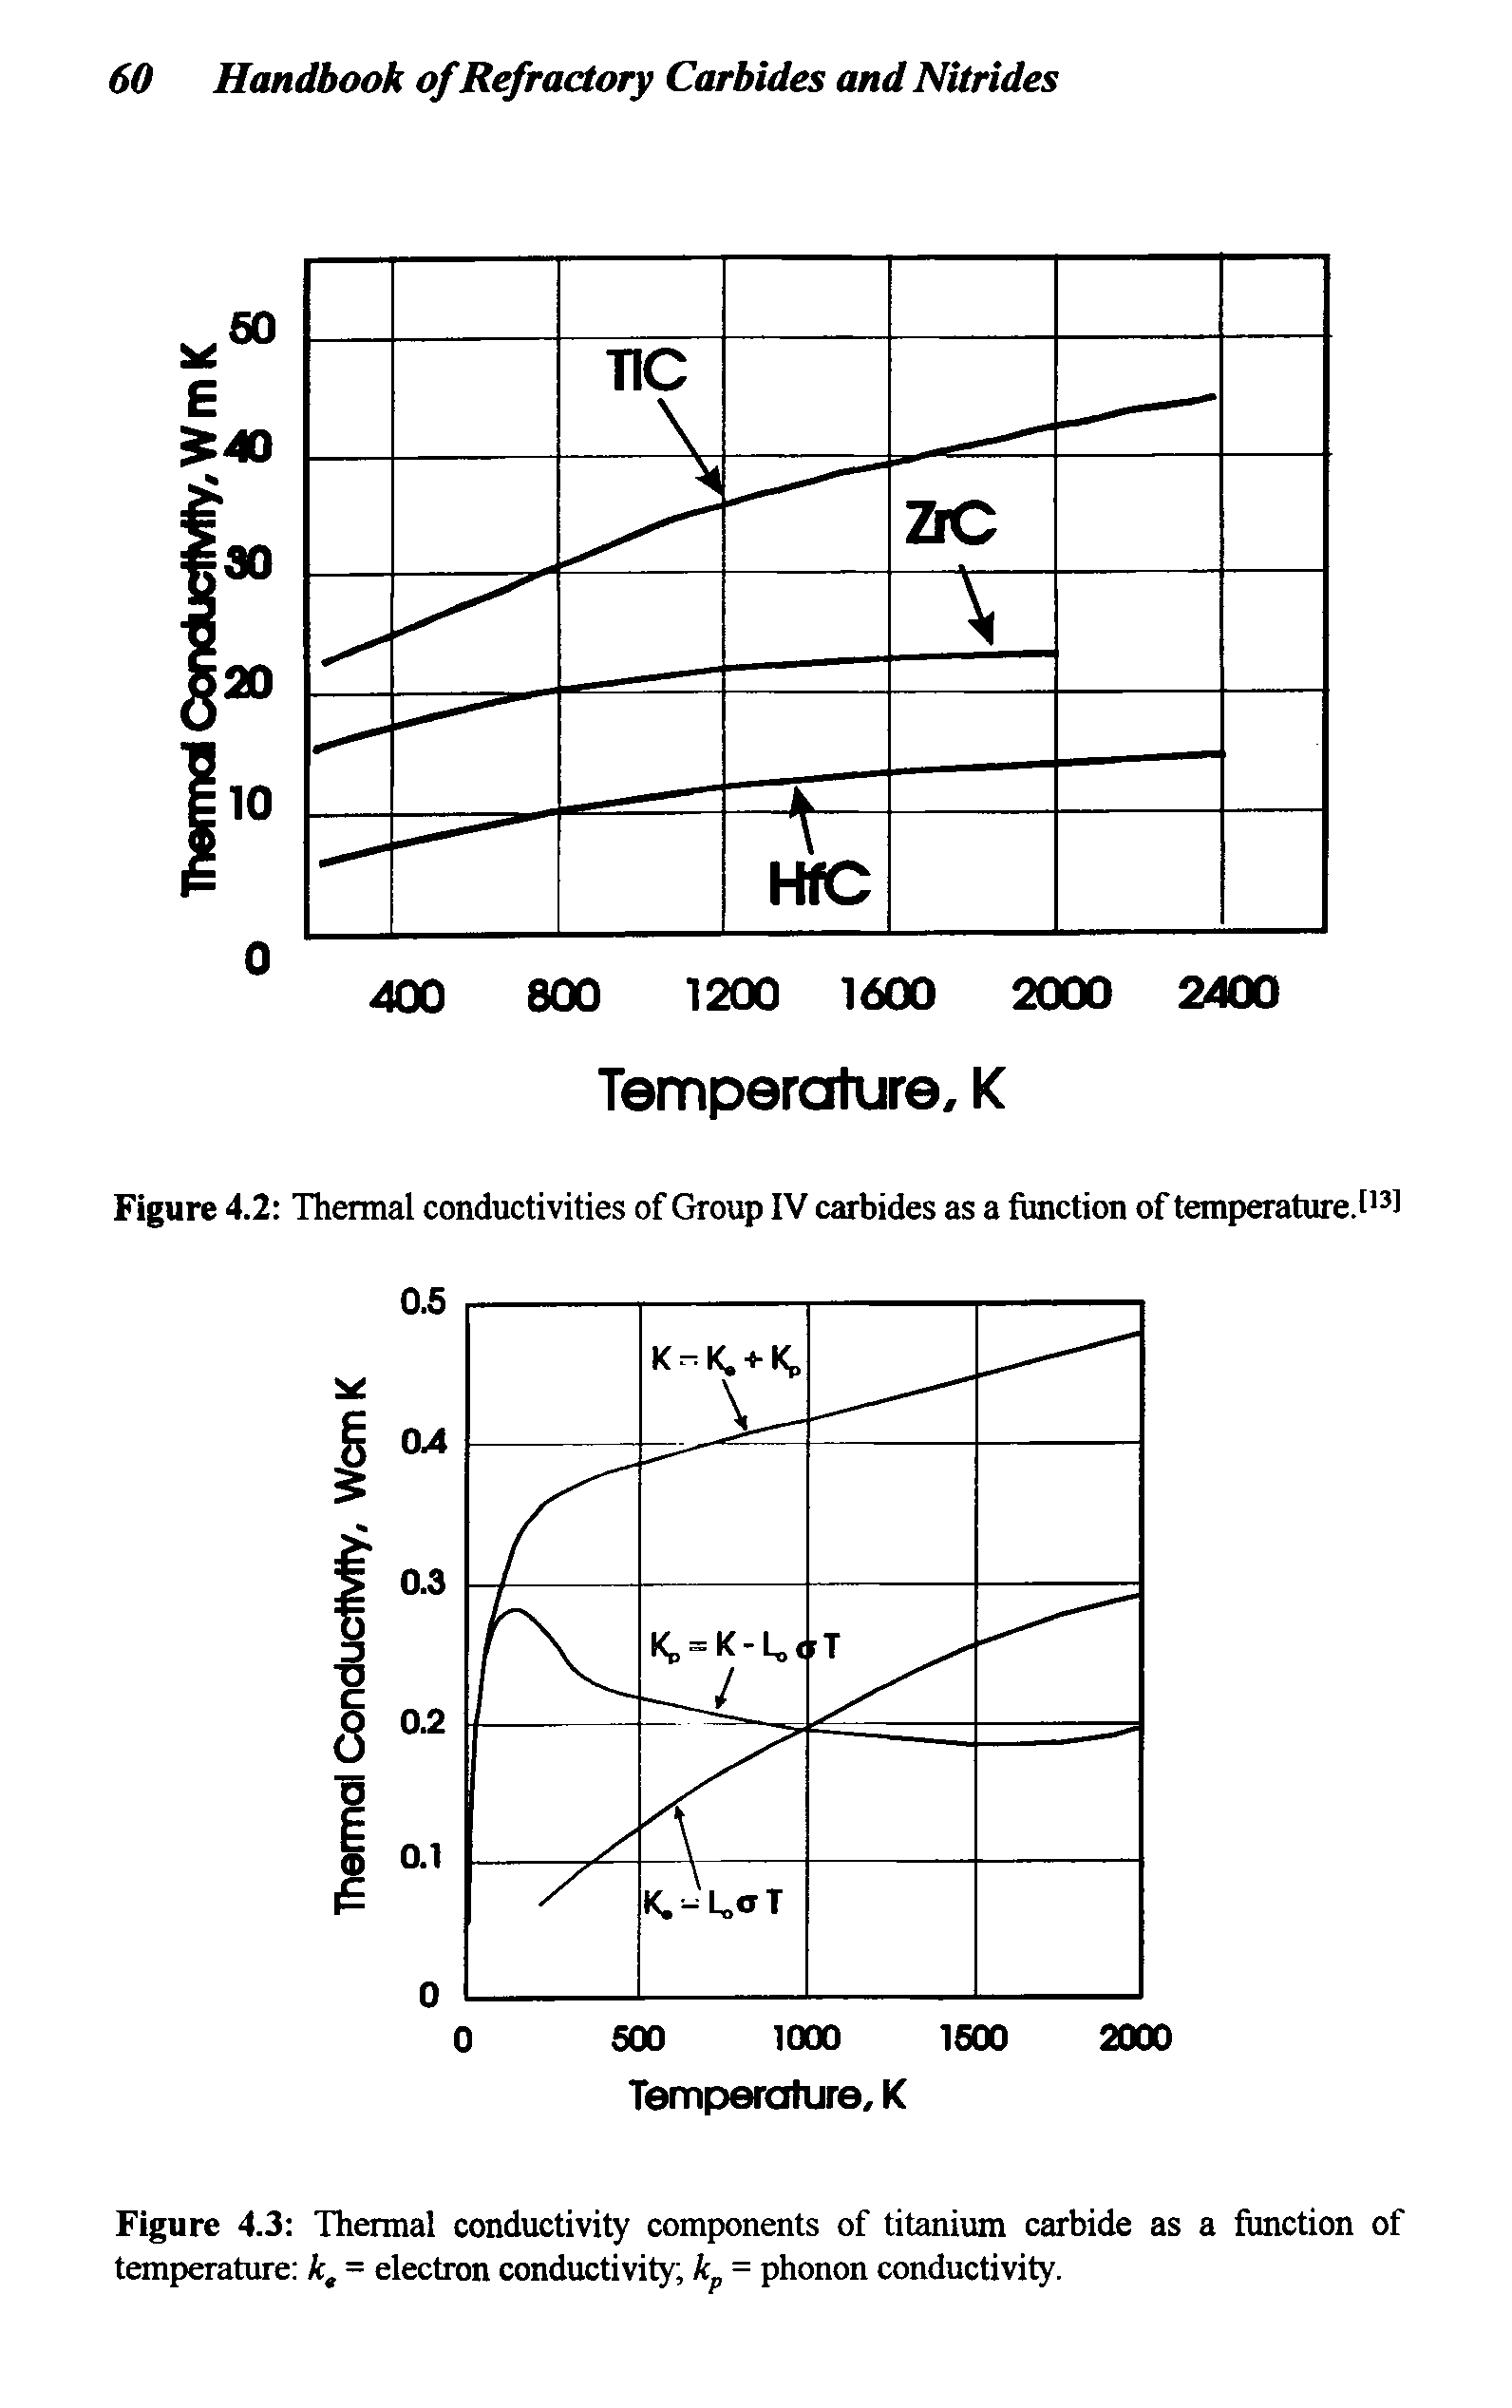 Figure 4.3 Thermal conductivity components of titanium carbide as a function of temperature k, = electron conductivity, k = phonon conductivity.